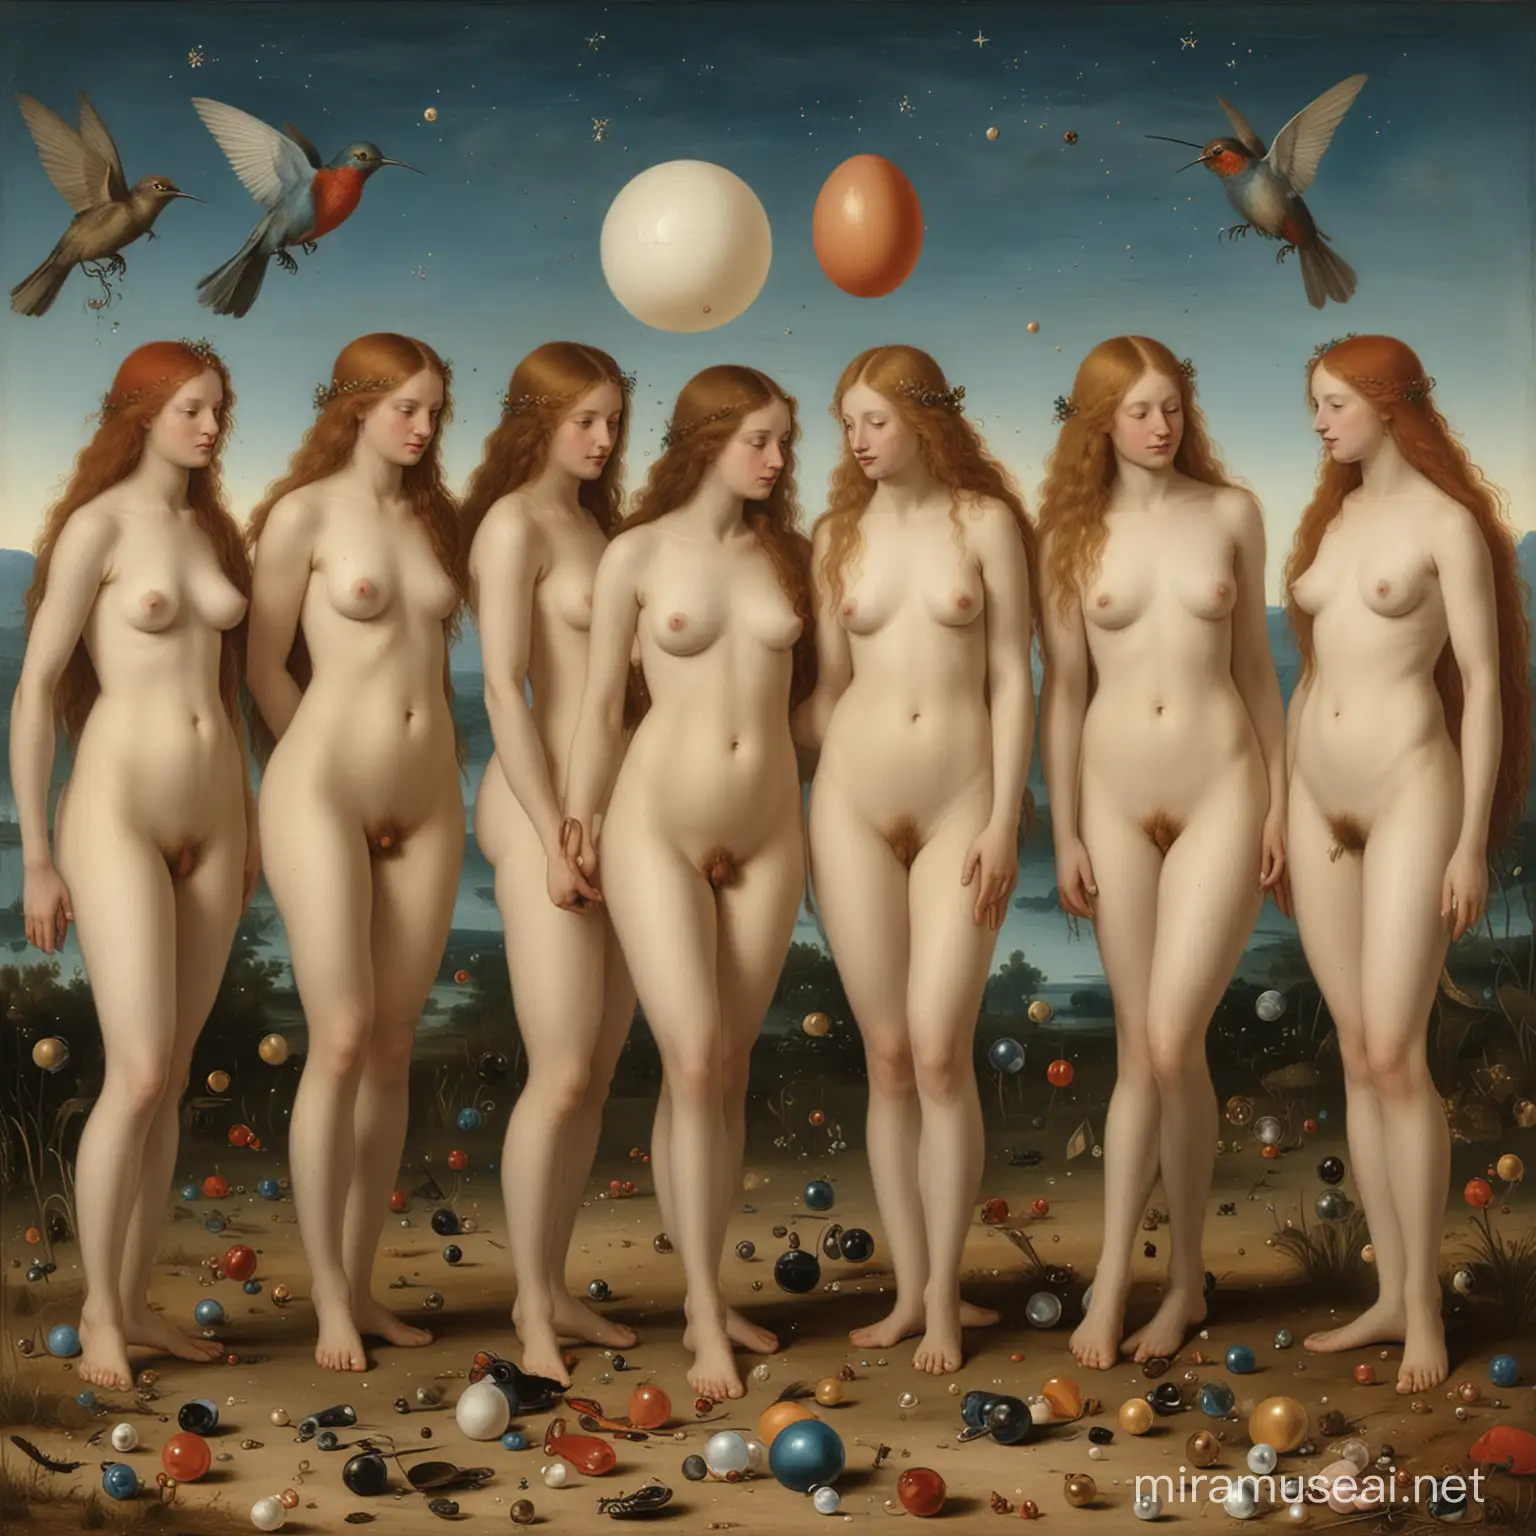 Hyeronimus Bosch paints beautiful seven naked young women with long hair of different color. Above t deep clear sky is full of giant blue, red , golden colibri. On the ground there are giant round and egg shaped white pearls